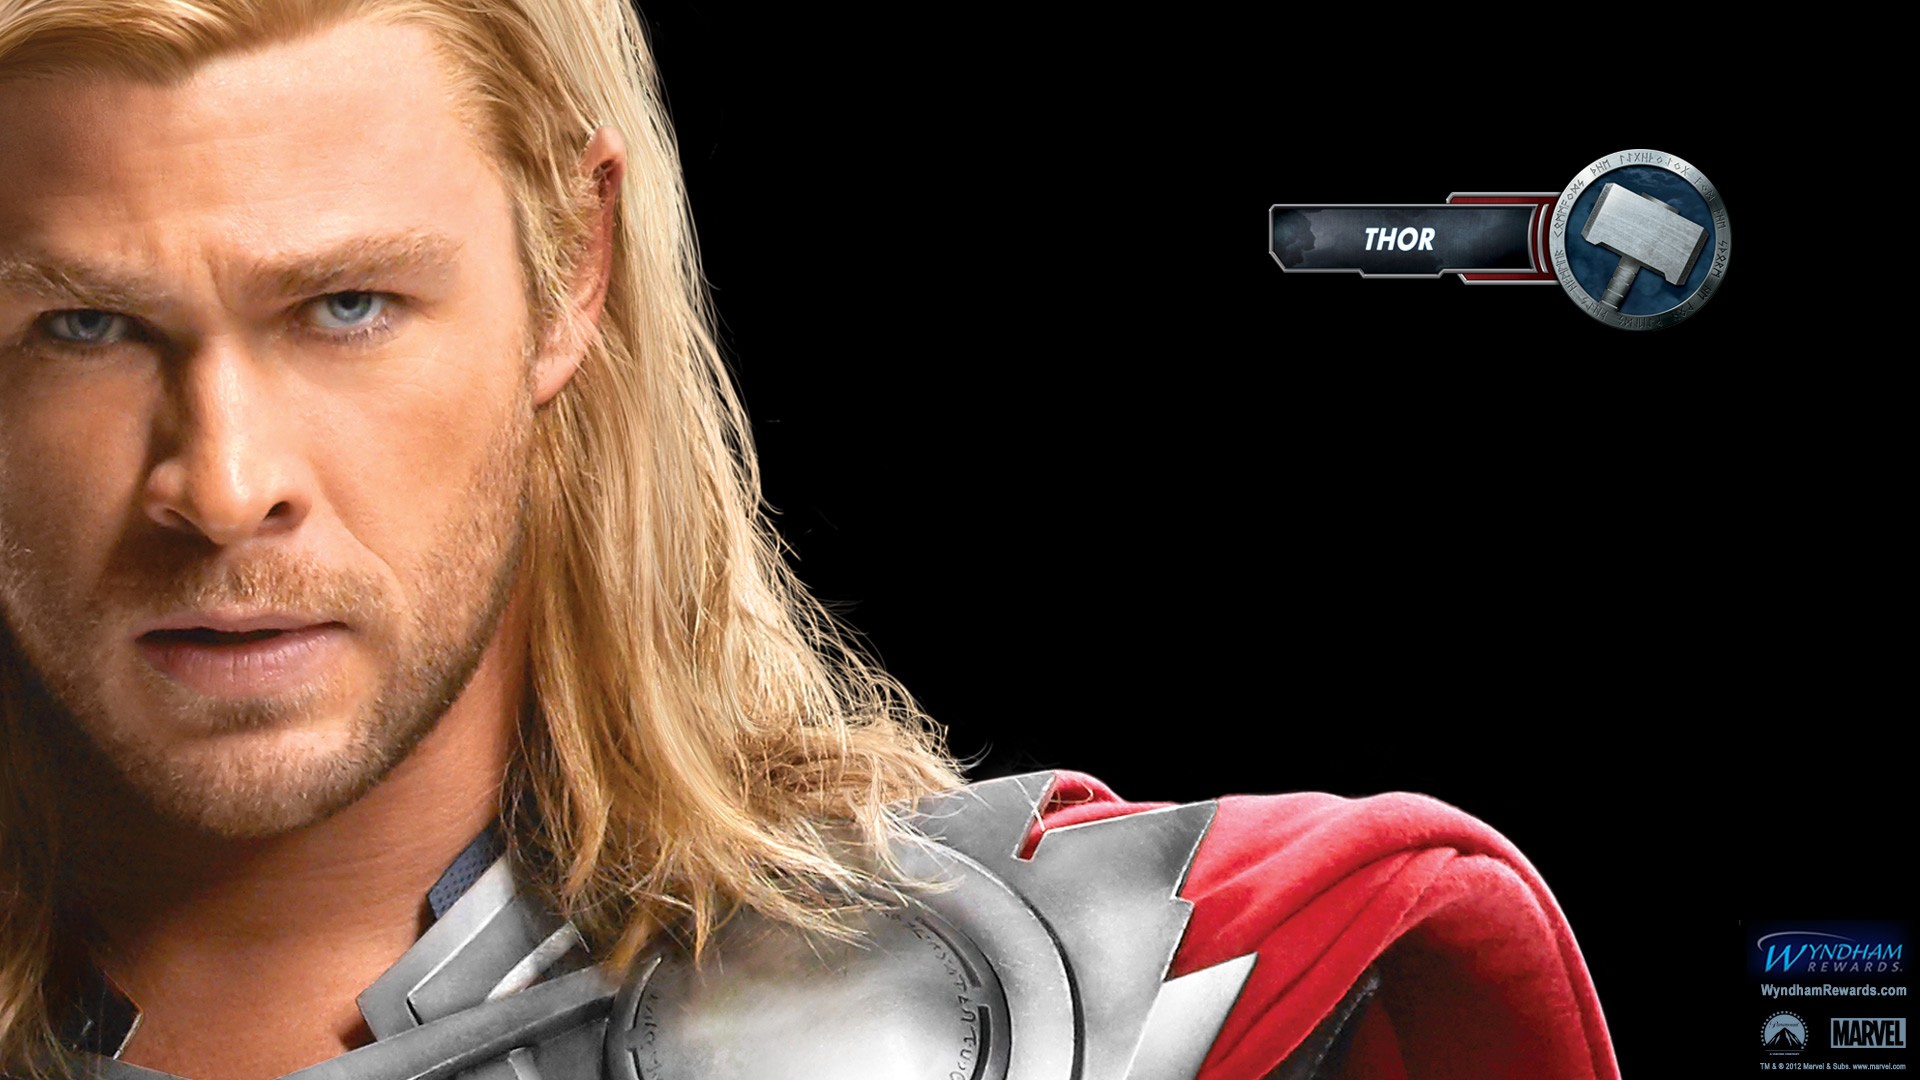 thor, Movie, Posters, Chris, Hemsworth, Faces, The, Avengers,  movie Wallpaper